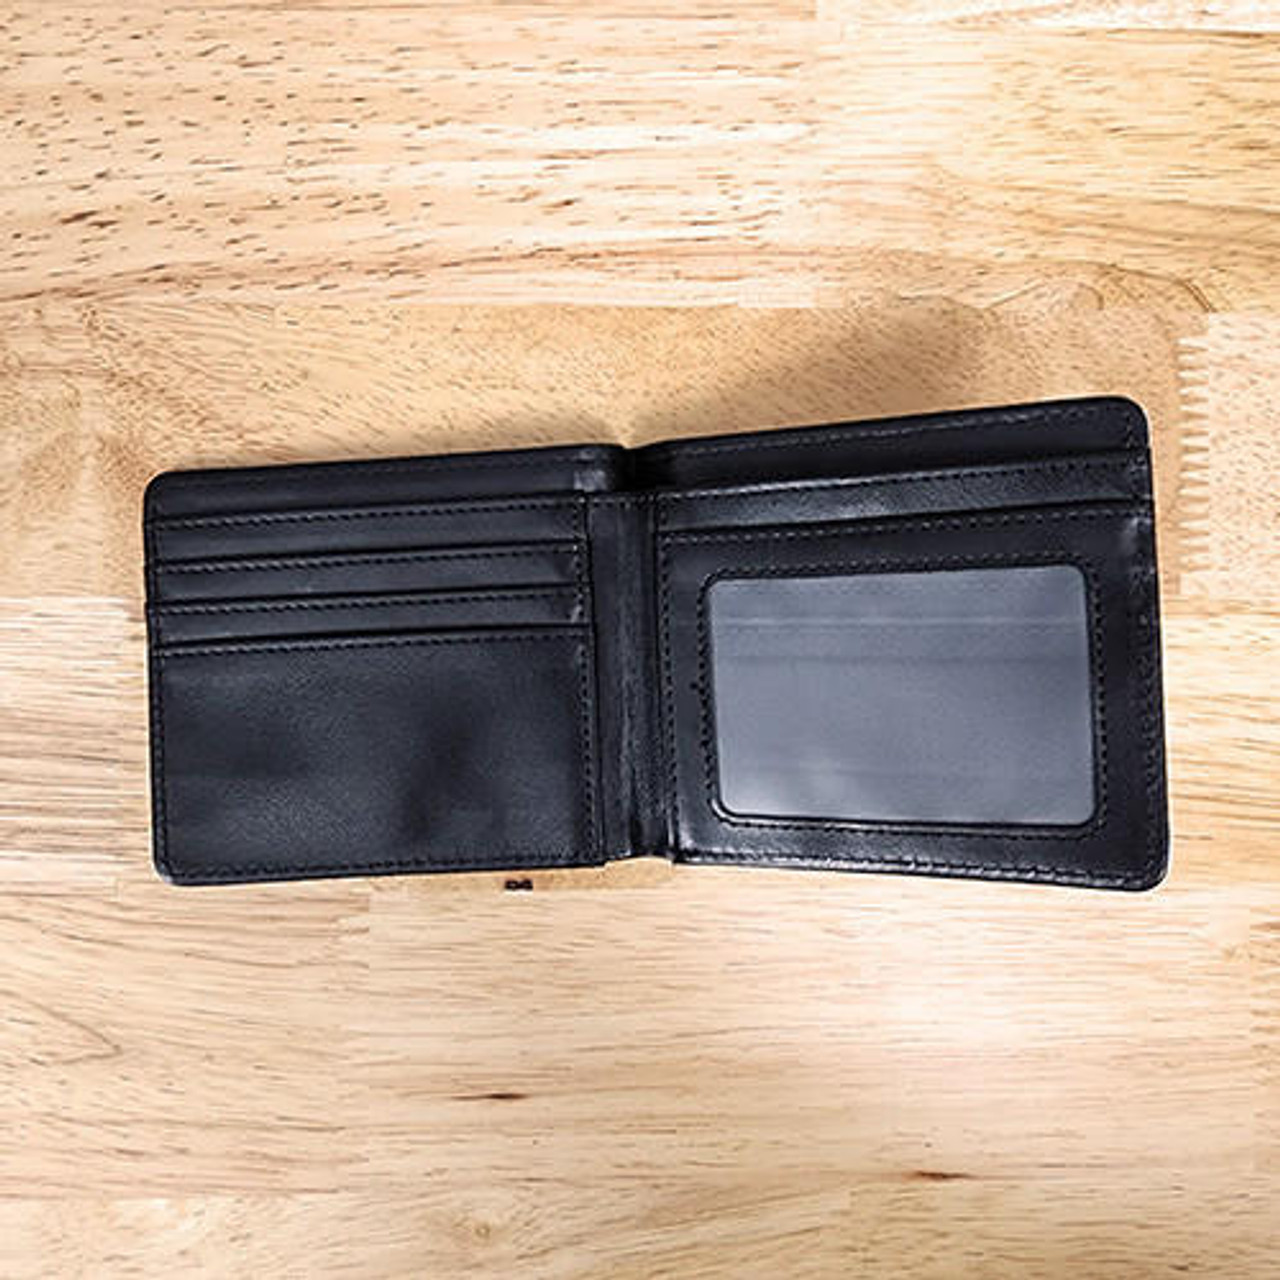 WALABlanks Sublimation Wallet Blank